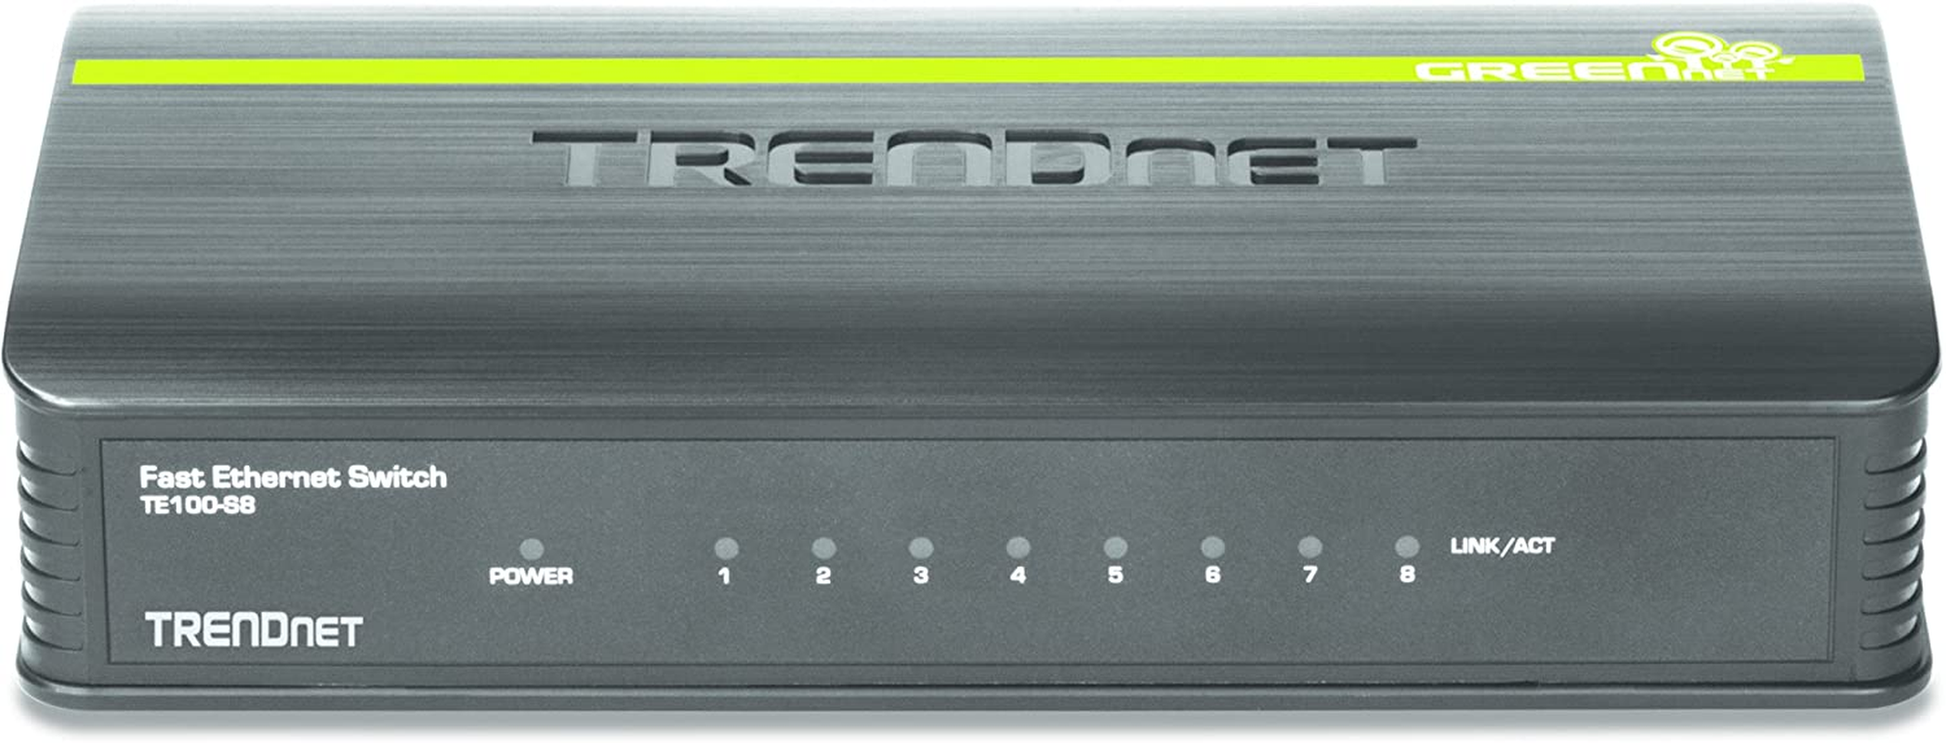 Trendnet 8-Port Unmanaged 10/100 Mbps Greennet Ethernet Desktop Switch, TE100-S8, 8 X 10/100 Mbps Ethernet Ports, 1.6 Gbps Switching Capacity, Plastic Housing, Network Ethernet Switch, Plug & Play Black